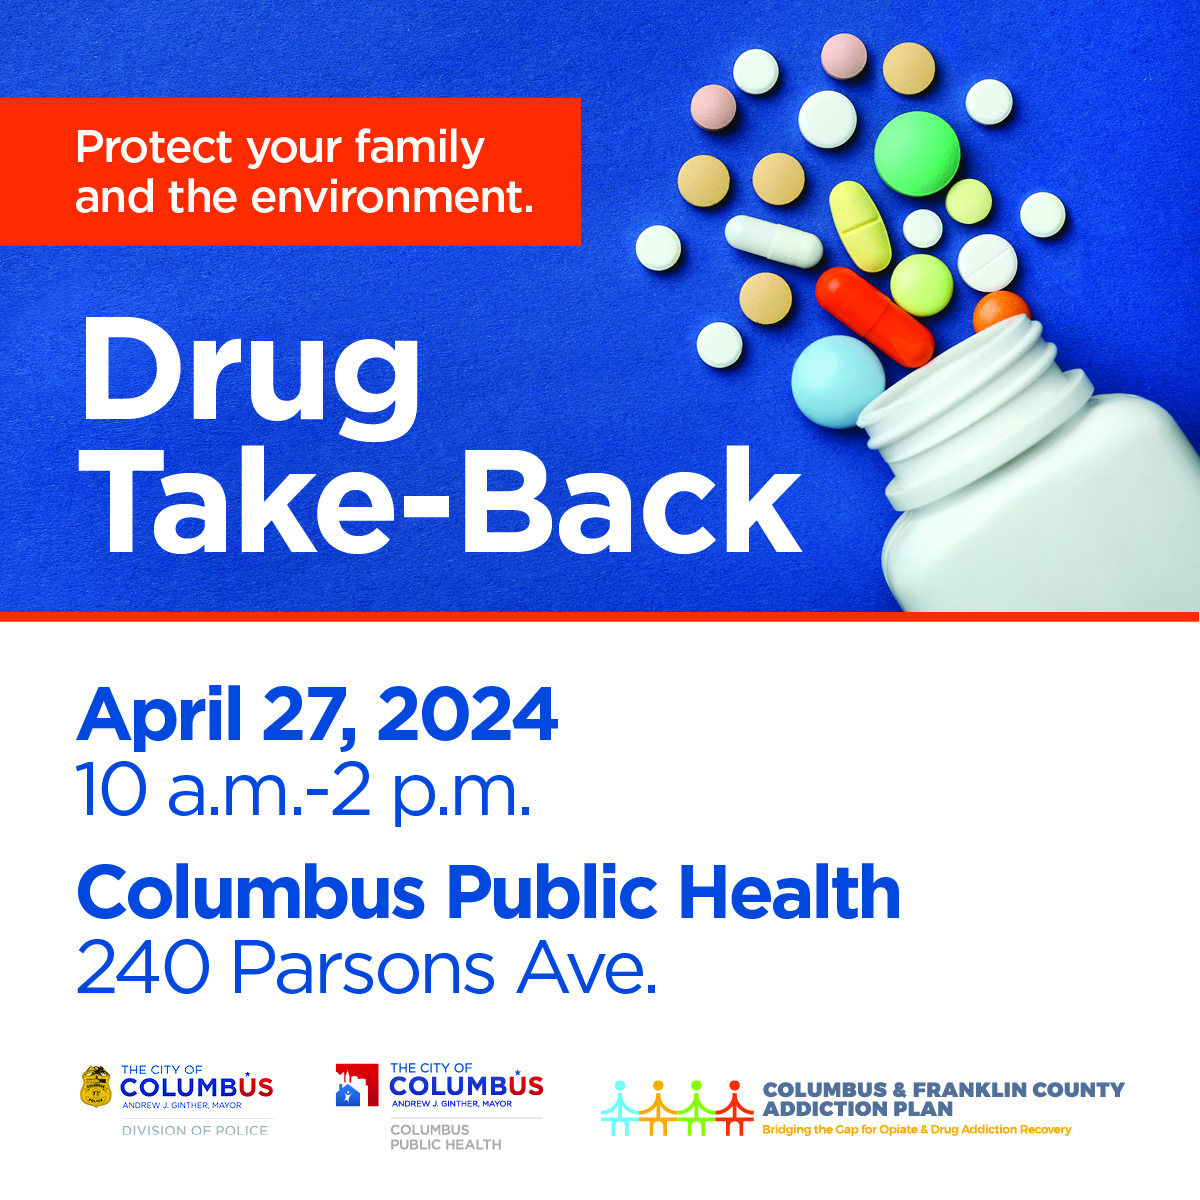 Drop off unused or unwanted medicine today from 10 a.m. to 2 p.m. at Columbus Public Health.